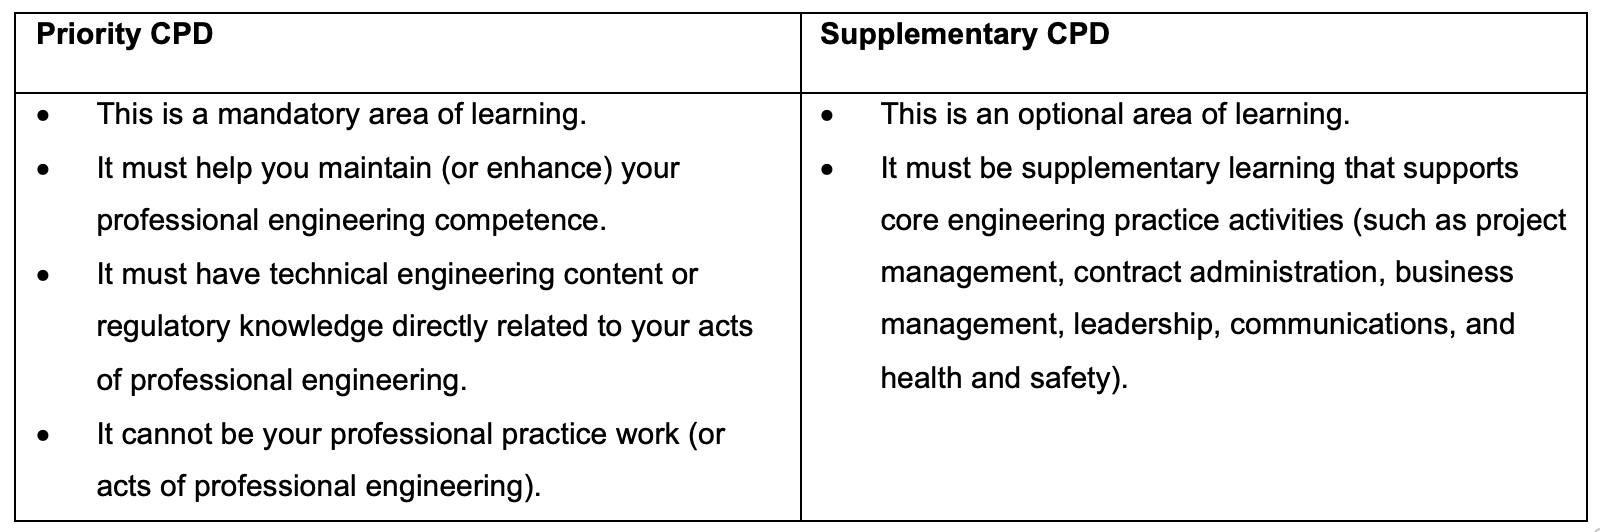 Two areas of learning (or learning content) are valid: Priority CPD and Supplementary CPD